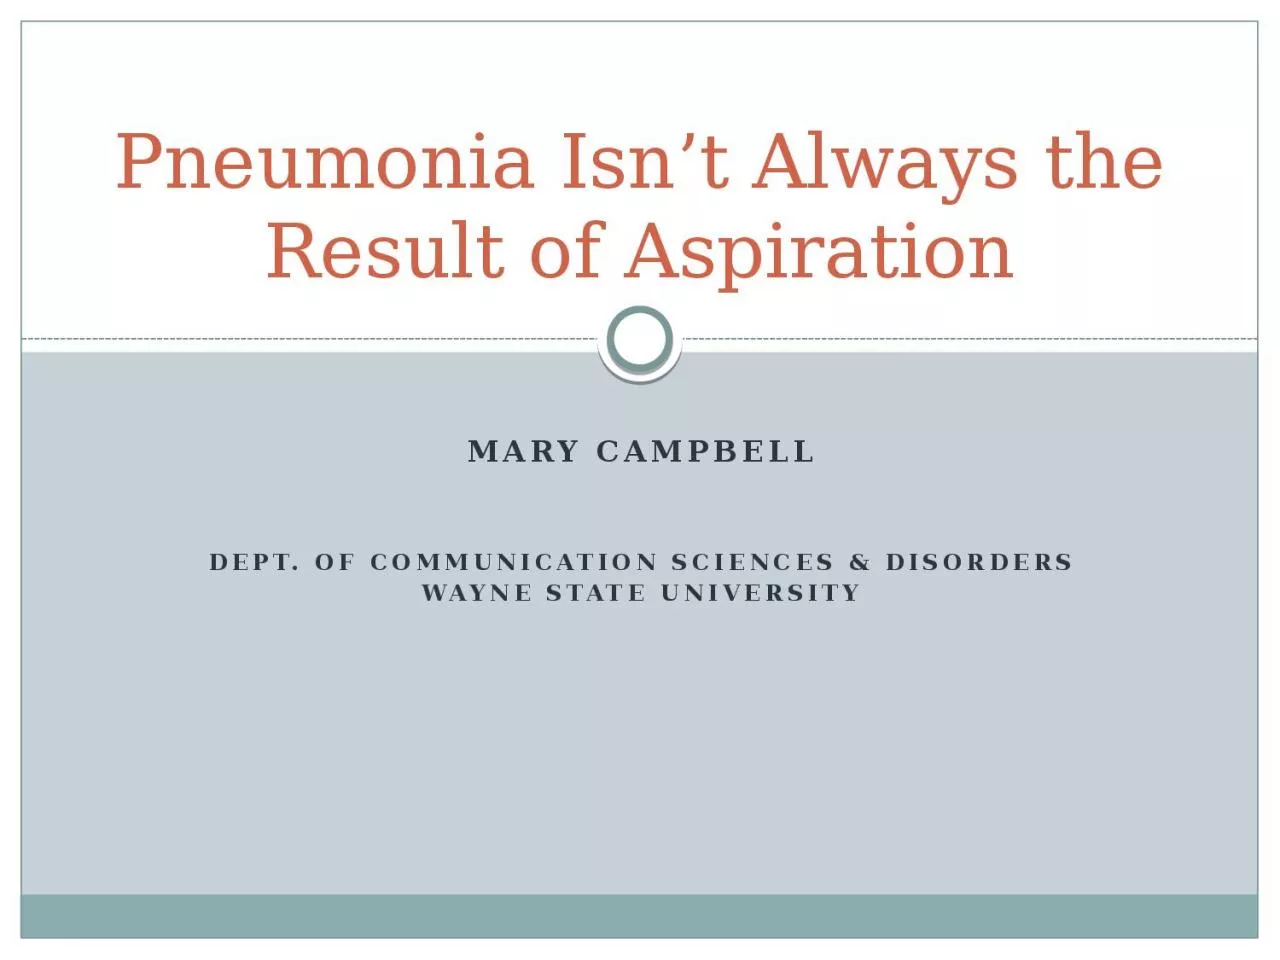 Mary Campbell Dept. OF COMMUNICATION SCIENCES & DISORDERS